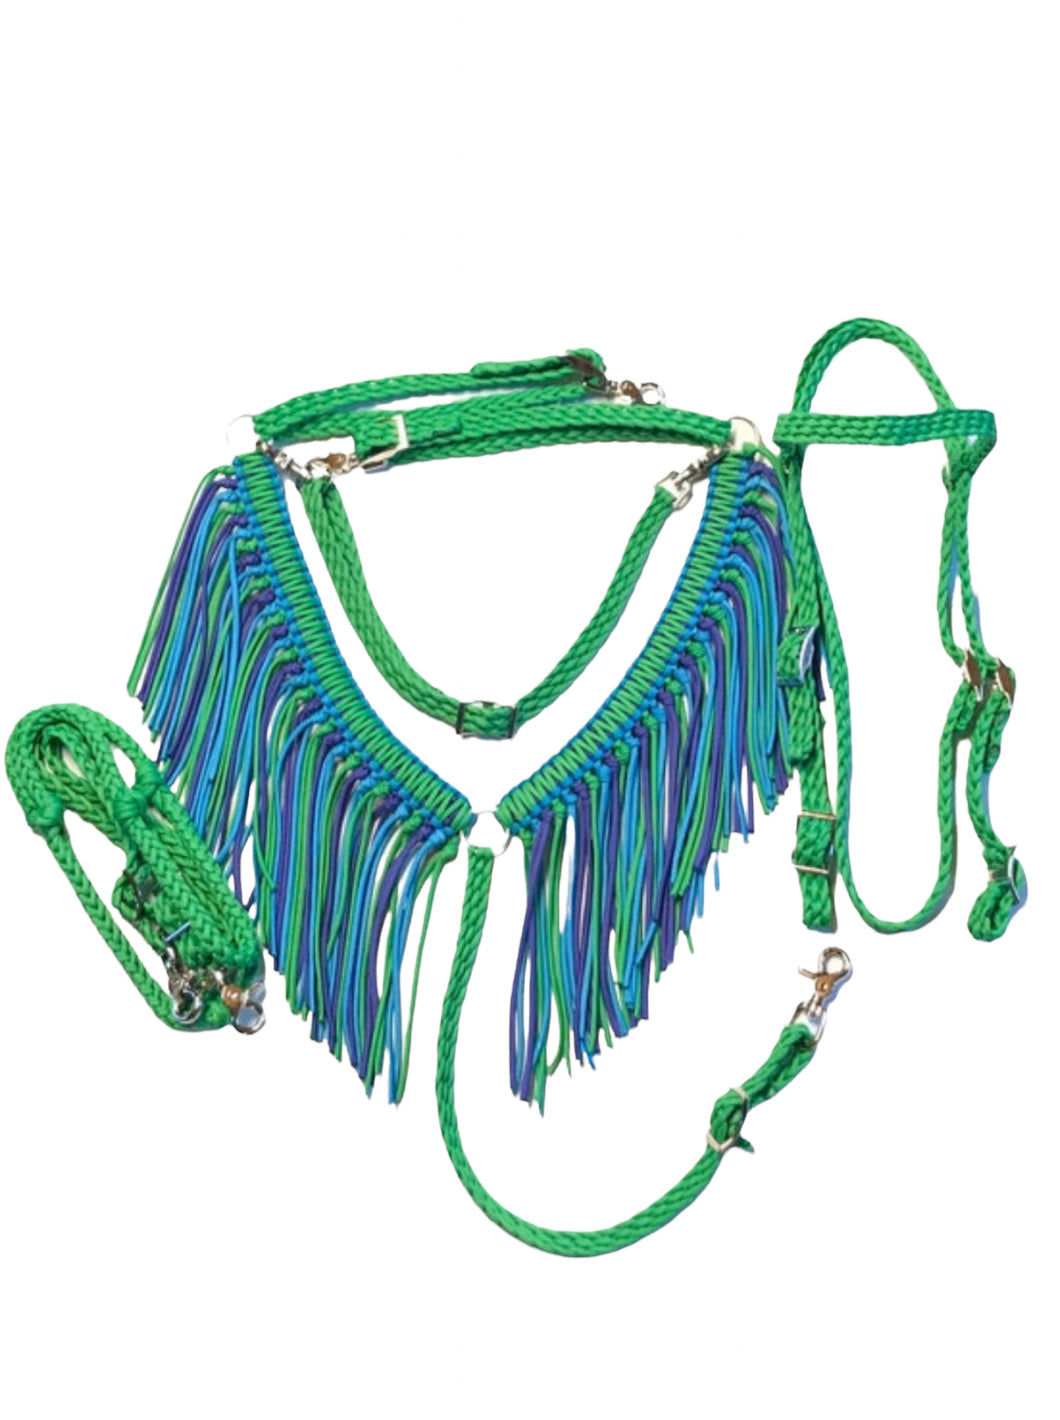 fringe neon green breast collar with a wither strap